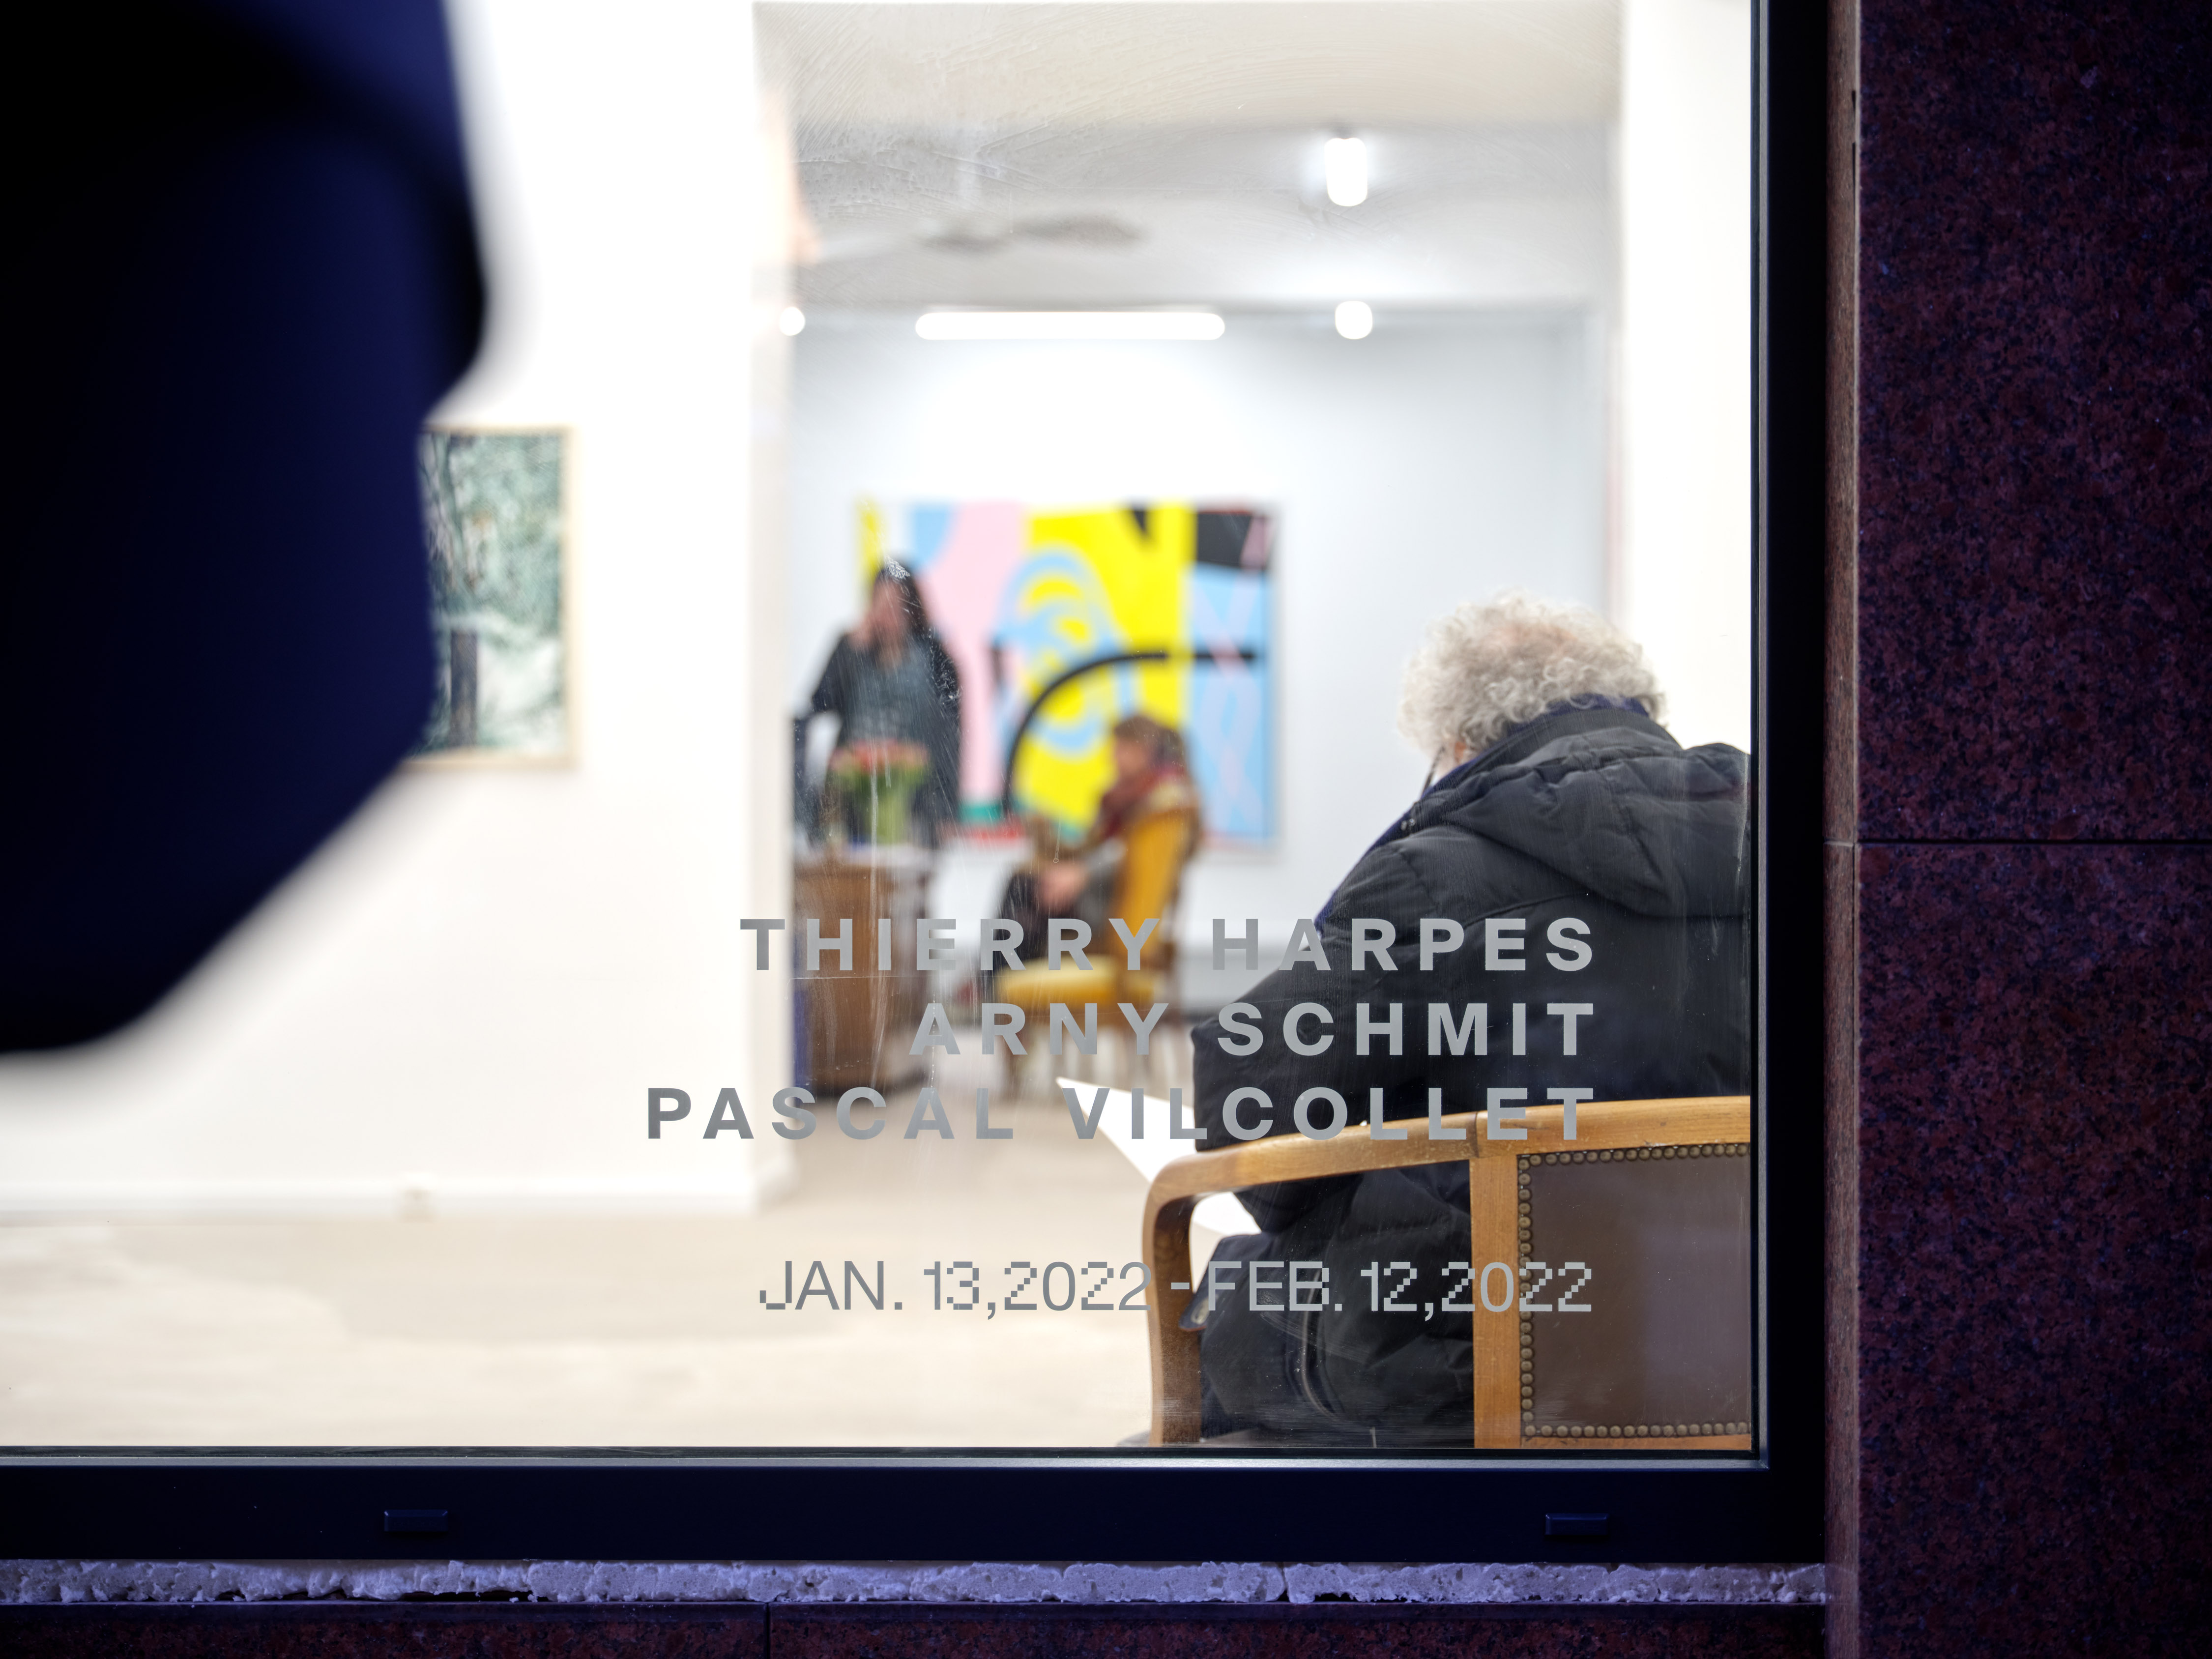 Exhibition Group Show | Part II with Thierry Harpes, Arny Schmit, Pascal Vilcollet at Reuter Bausch Art Gallery